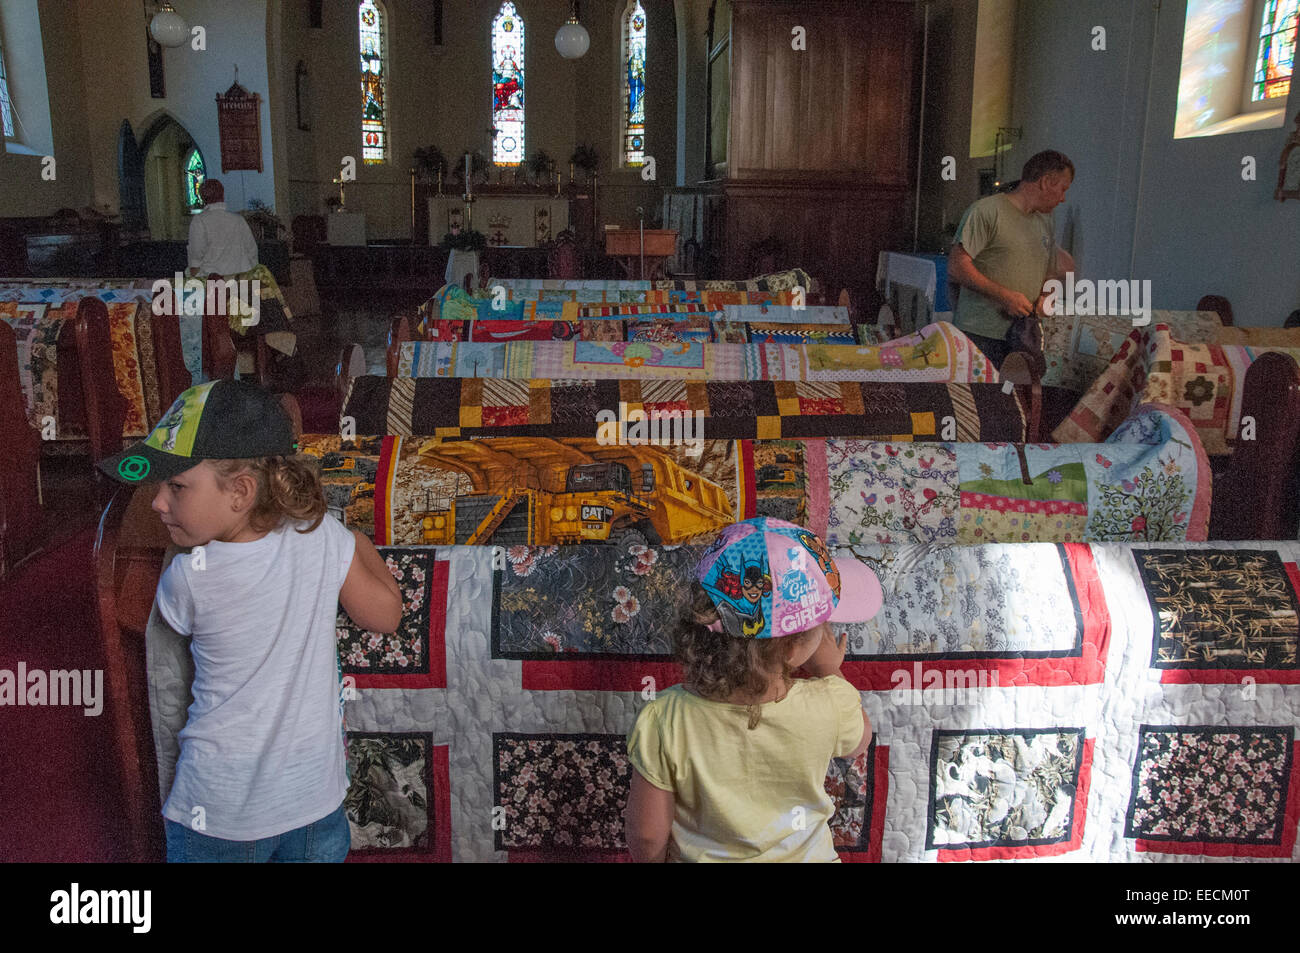 Quilting display at a farmers market at Christ Church, Beechworth, Victoria. The quilts have been spread across church pews. Stock Photo